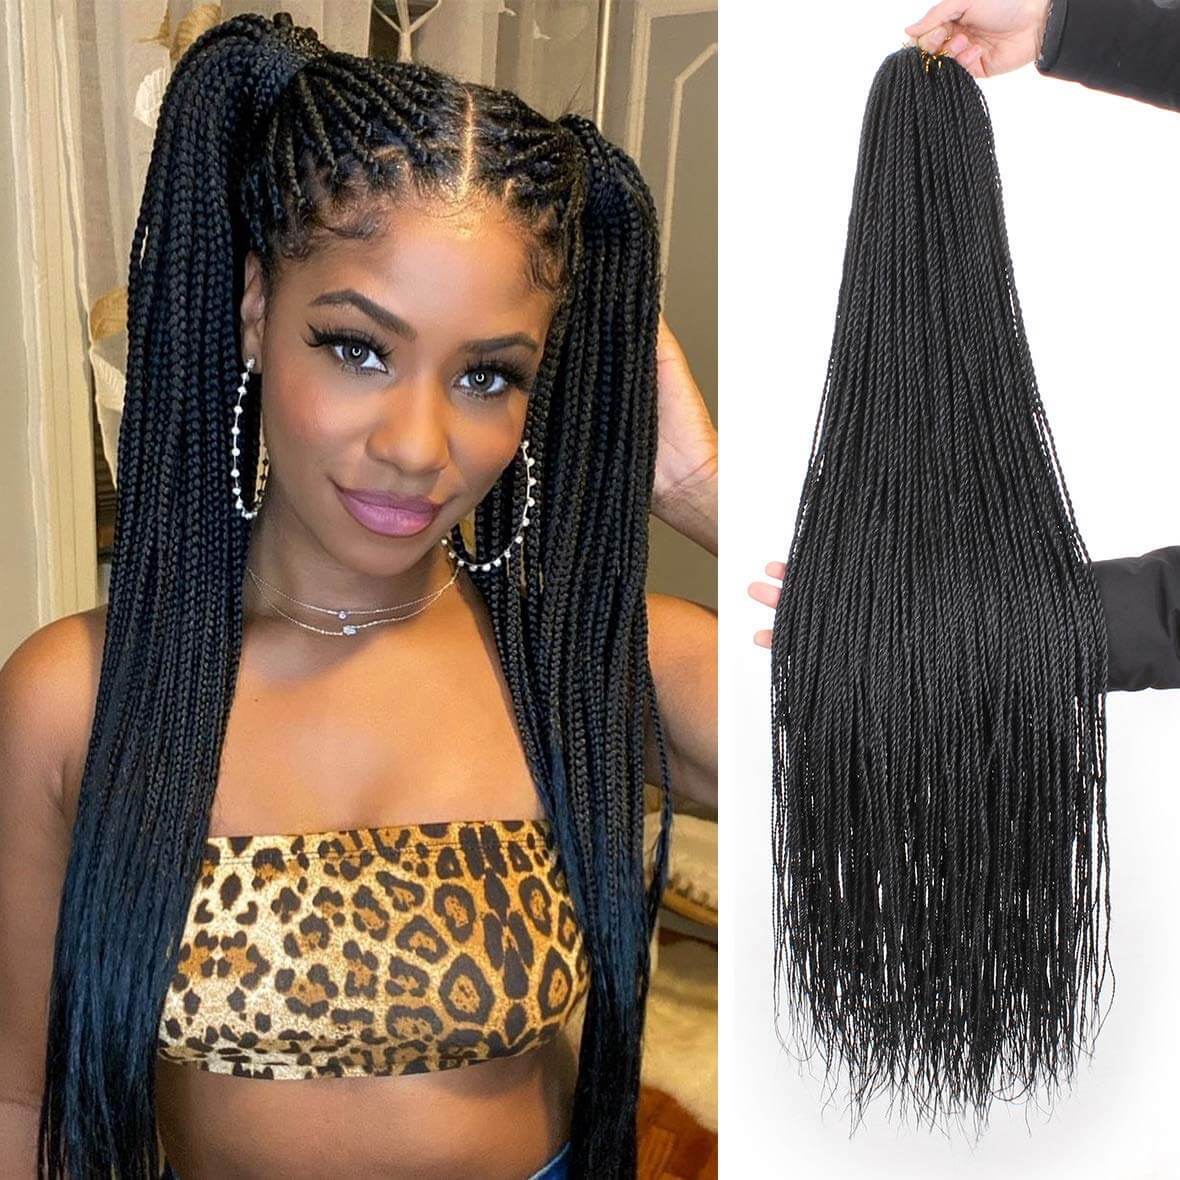 34Inch Long Senegalese Twist Hair Pre-looped Synthetic, 46% OFF